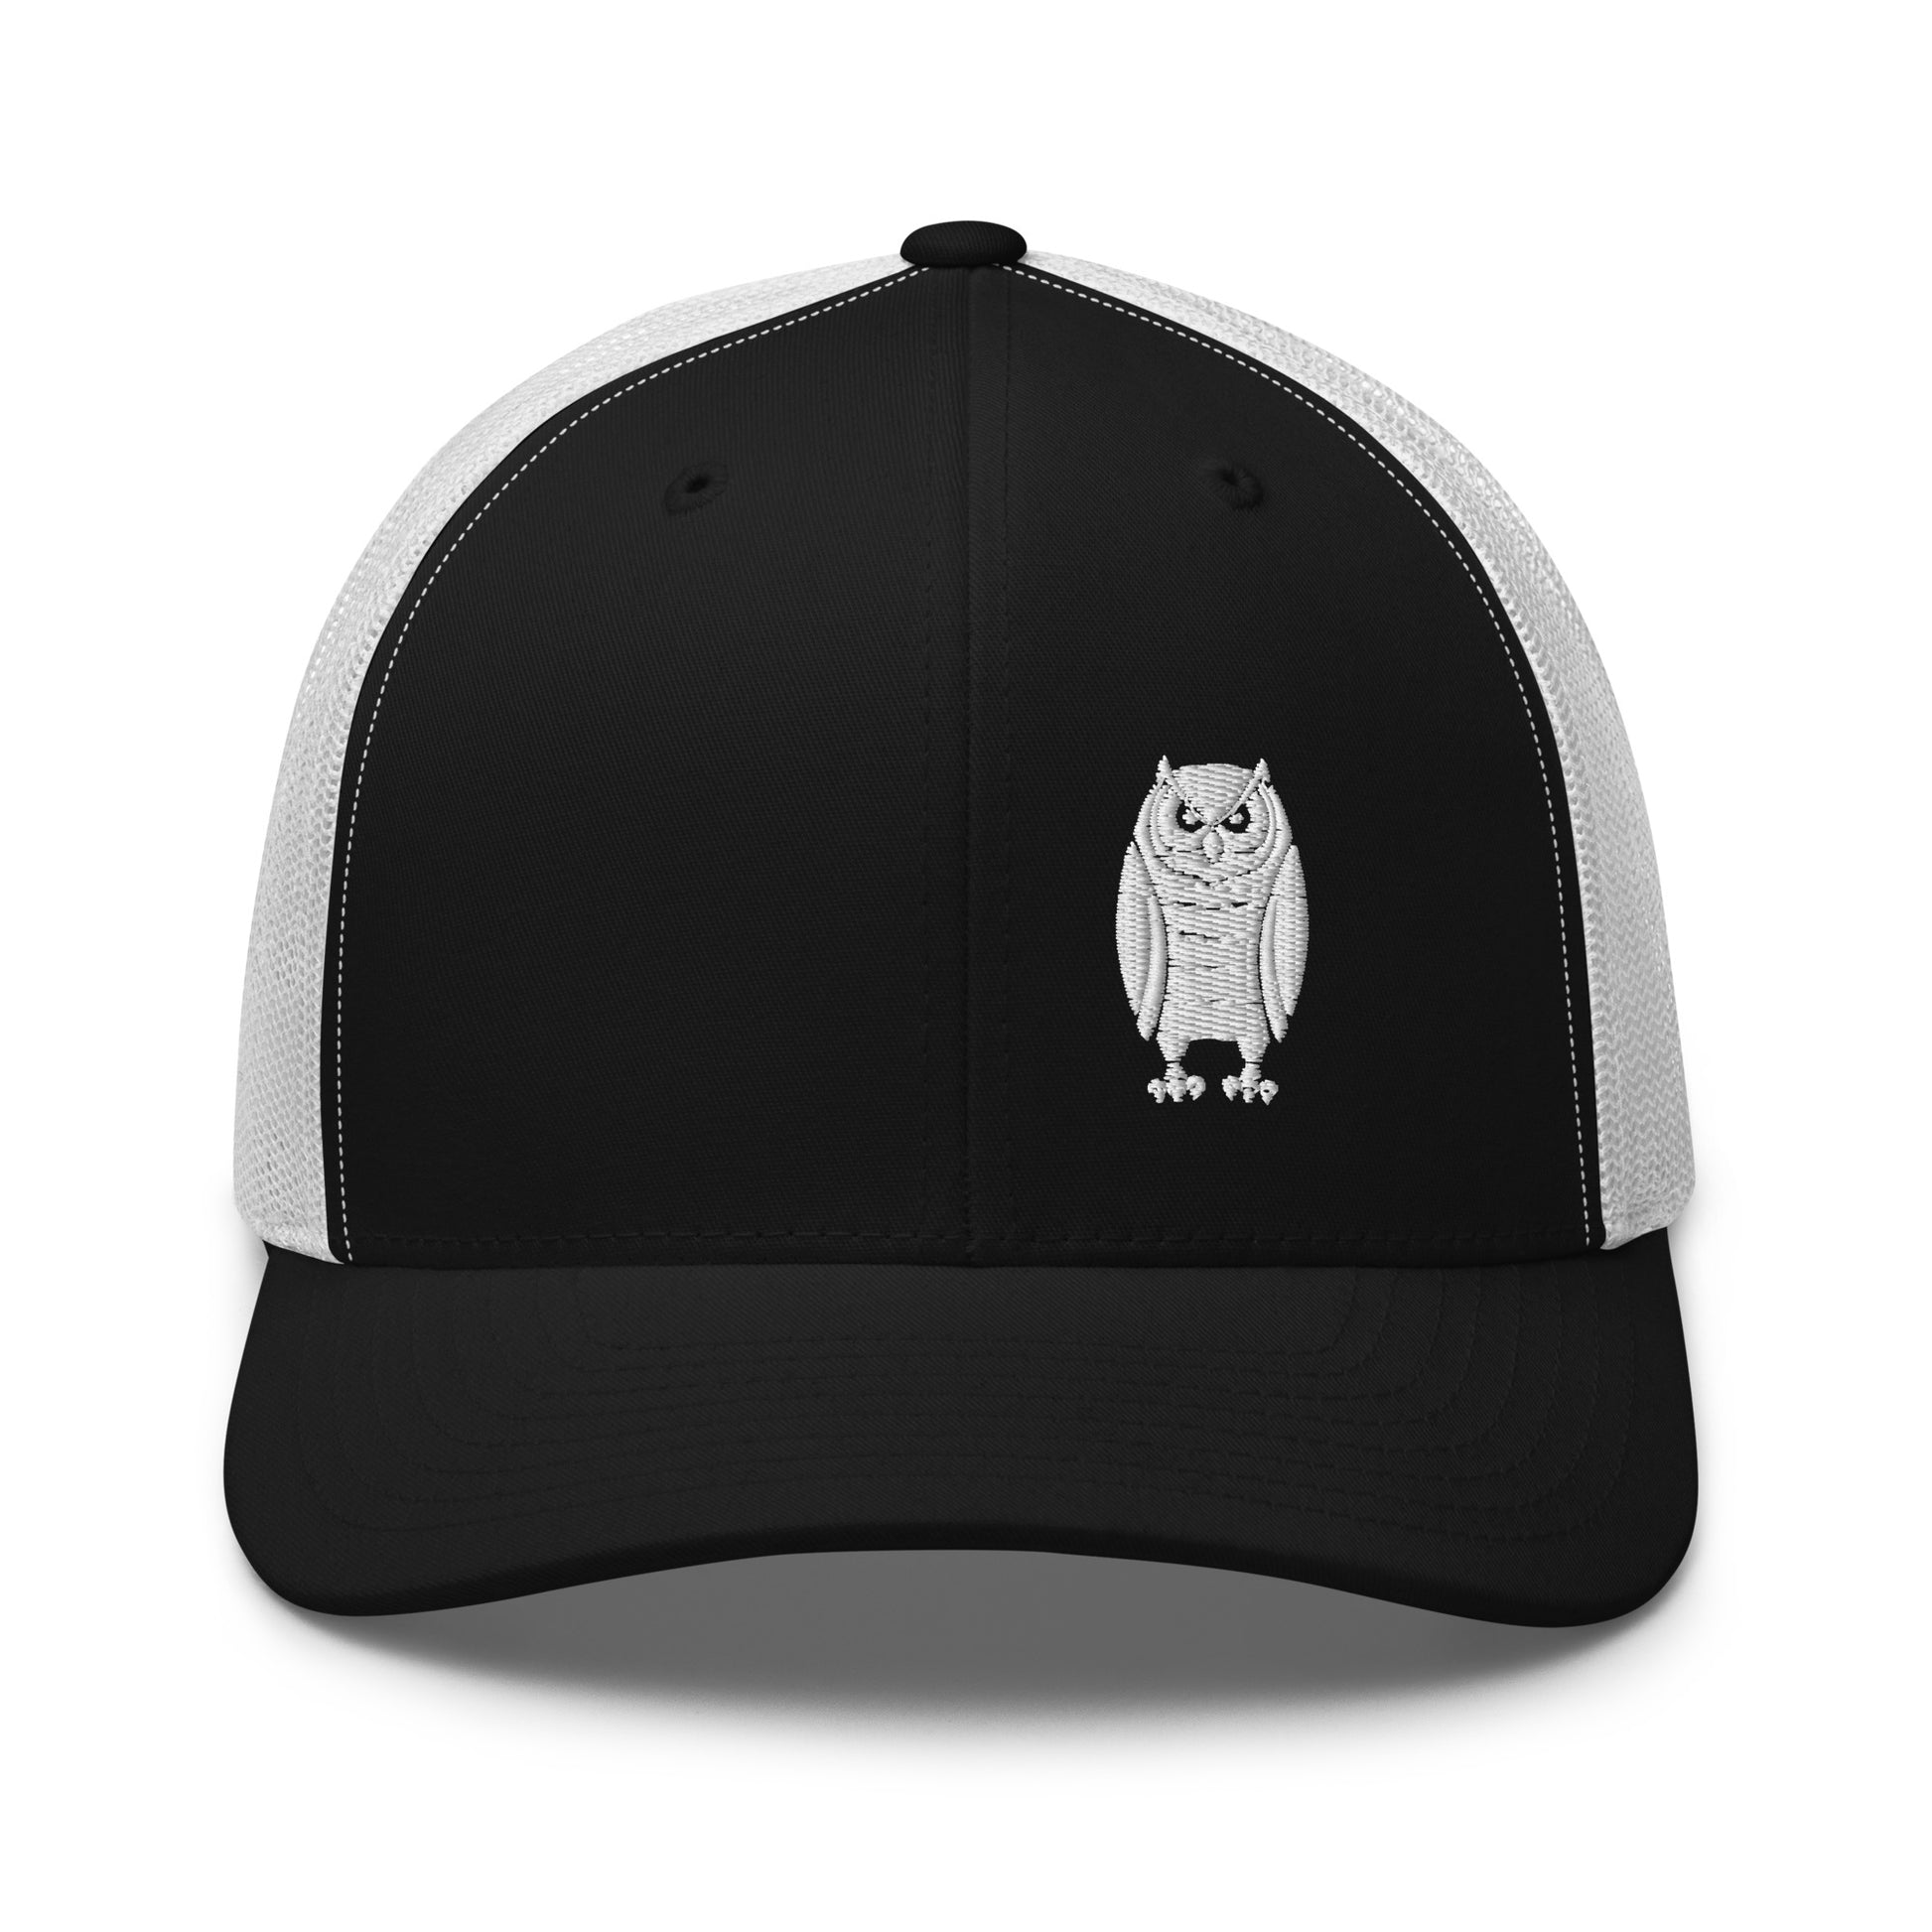 Owl Trucker Hat.  A Yupoon 6606 black and white hat with an Owl embroidered on it.